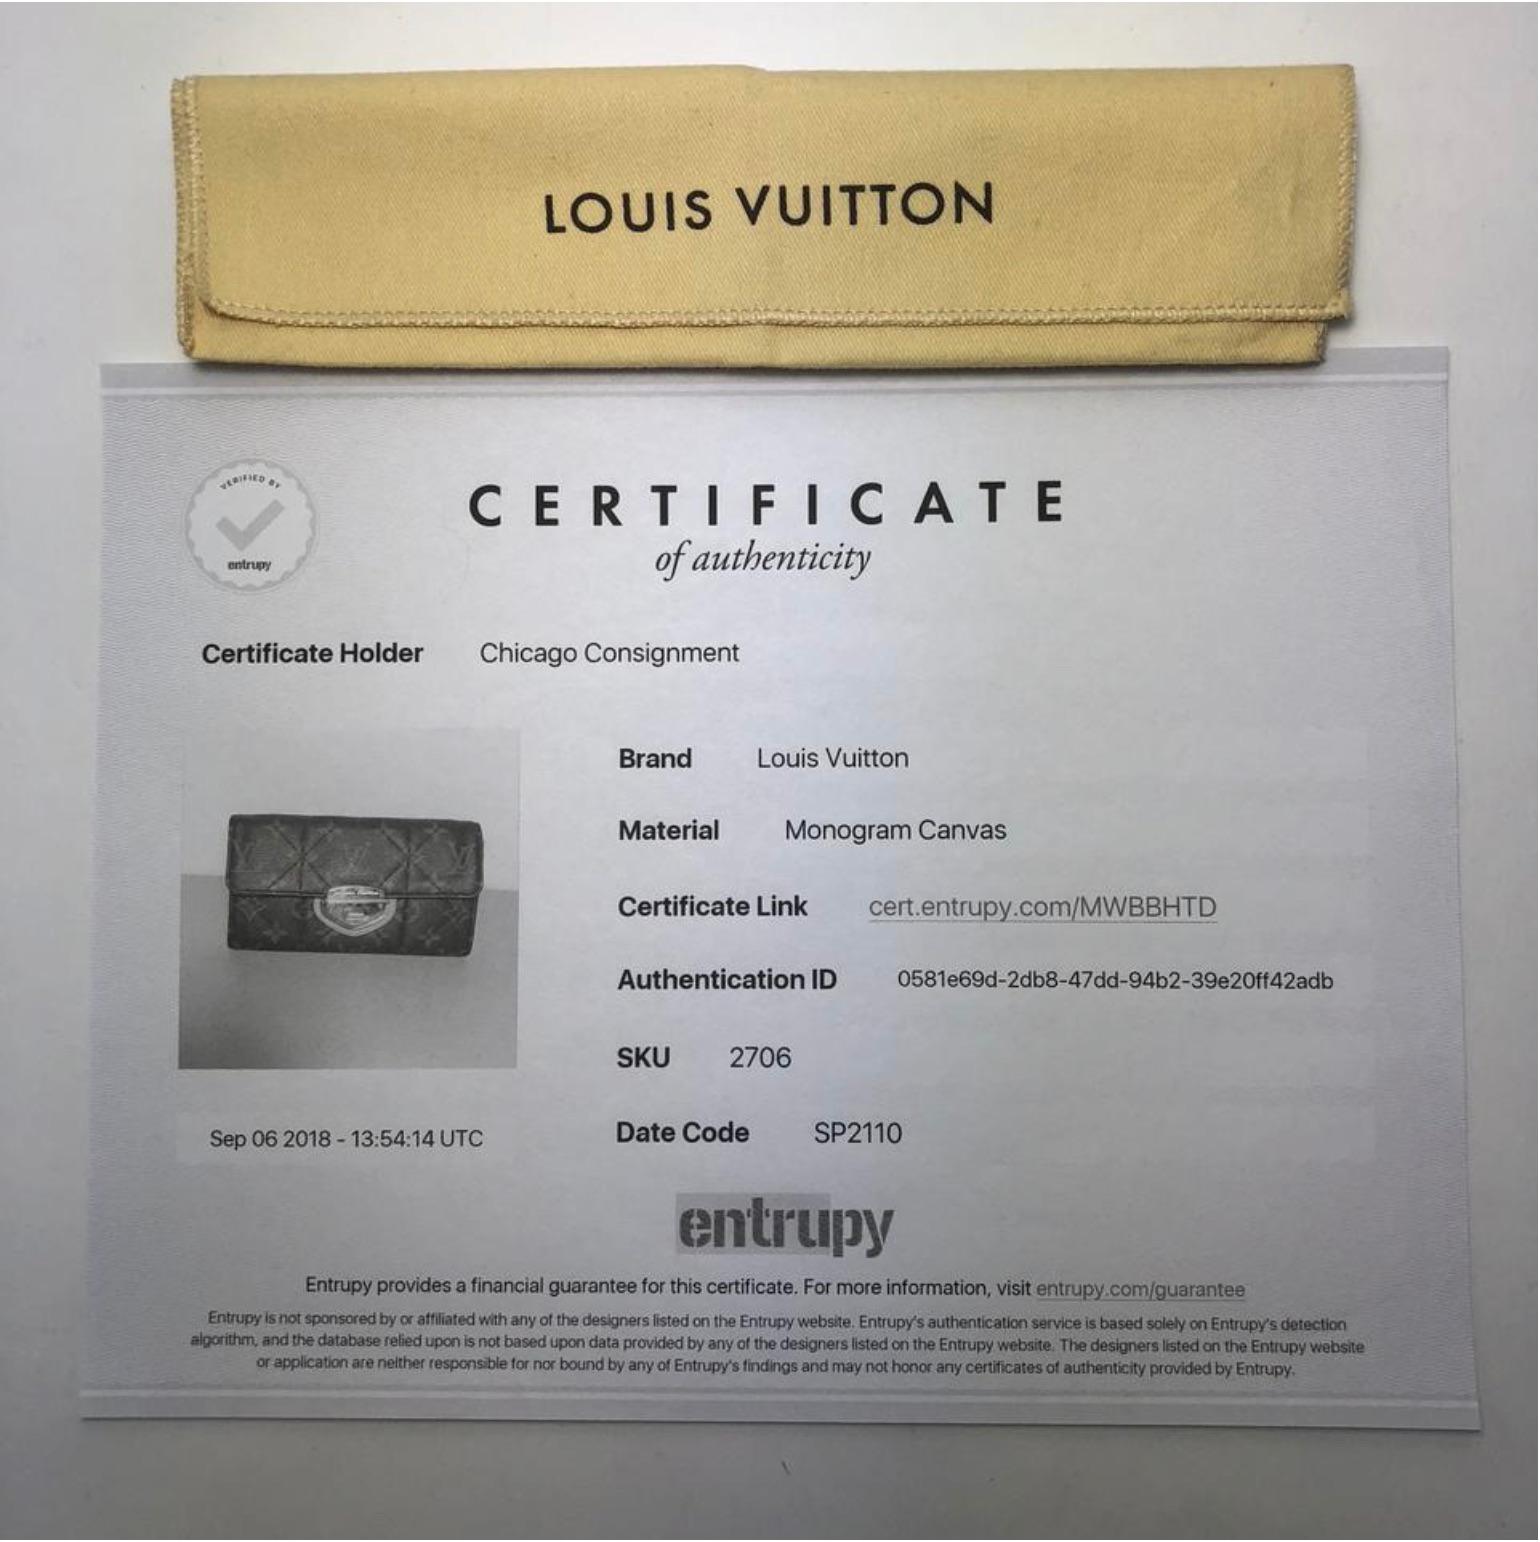 MODEL - Louis Vuitton Monogram Etoile Sarah Wallet

CONDITION - Exceptional! No watermarks, no dryness and small spot of wear under flap. Bright and shiny hardware with no tarnishing. No rips, holes, tears, stains or odors. Piece maintains original